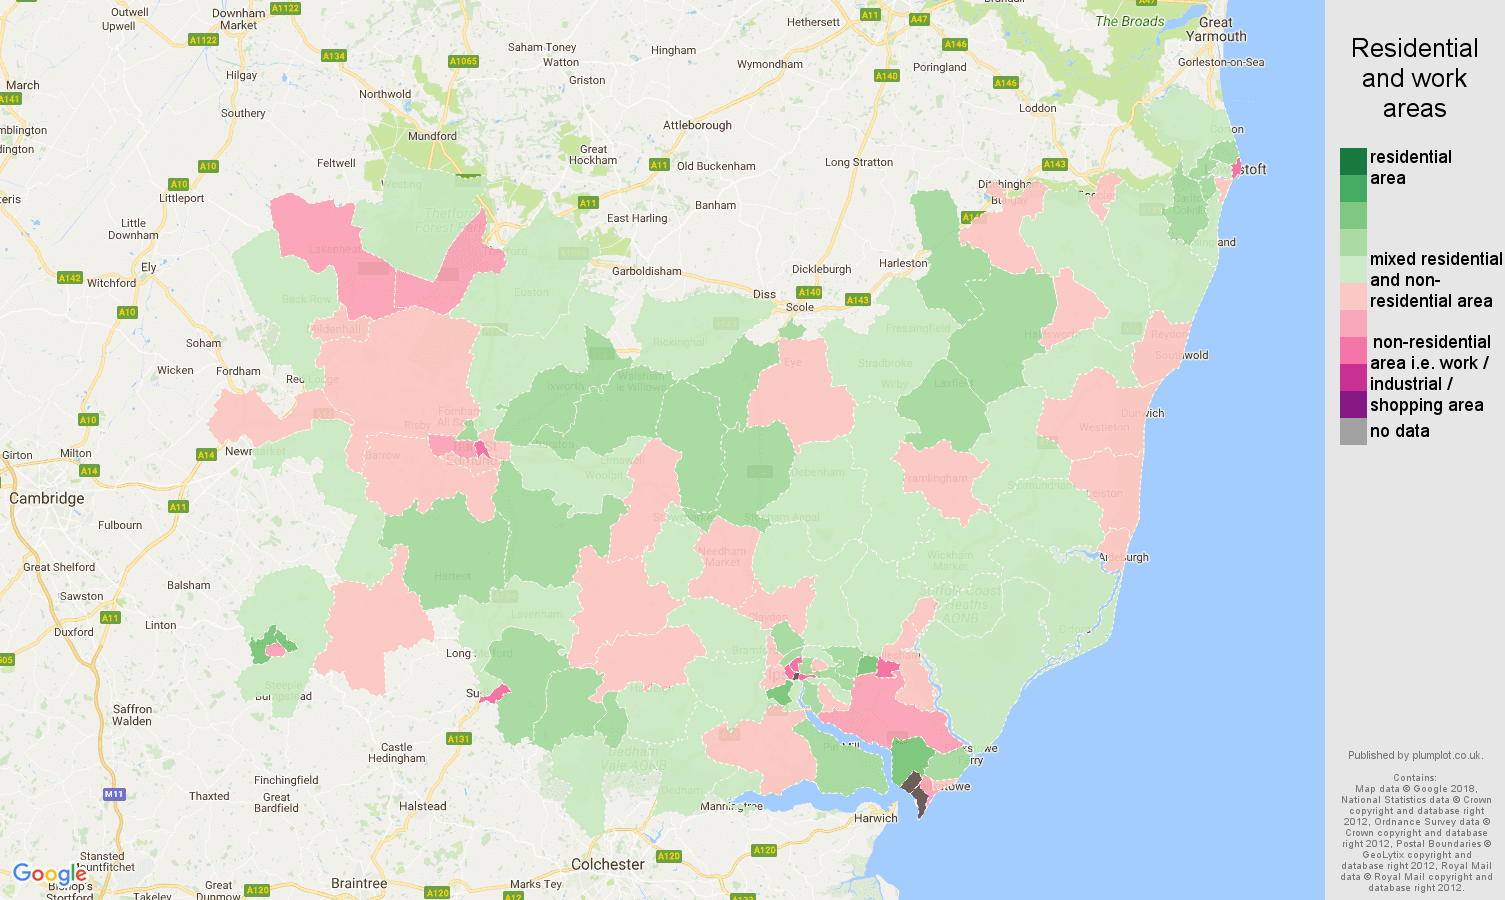 Suffolk population stats in maps and graphs.